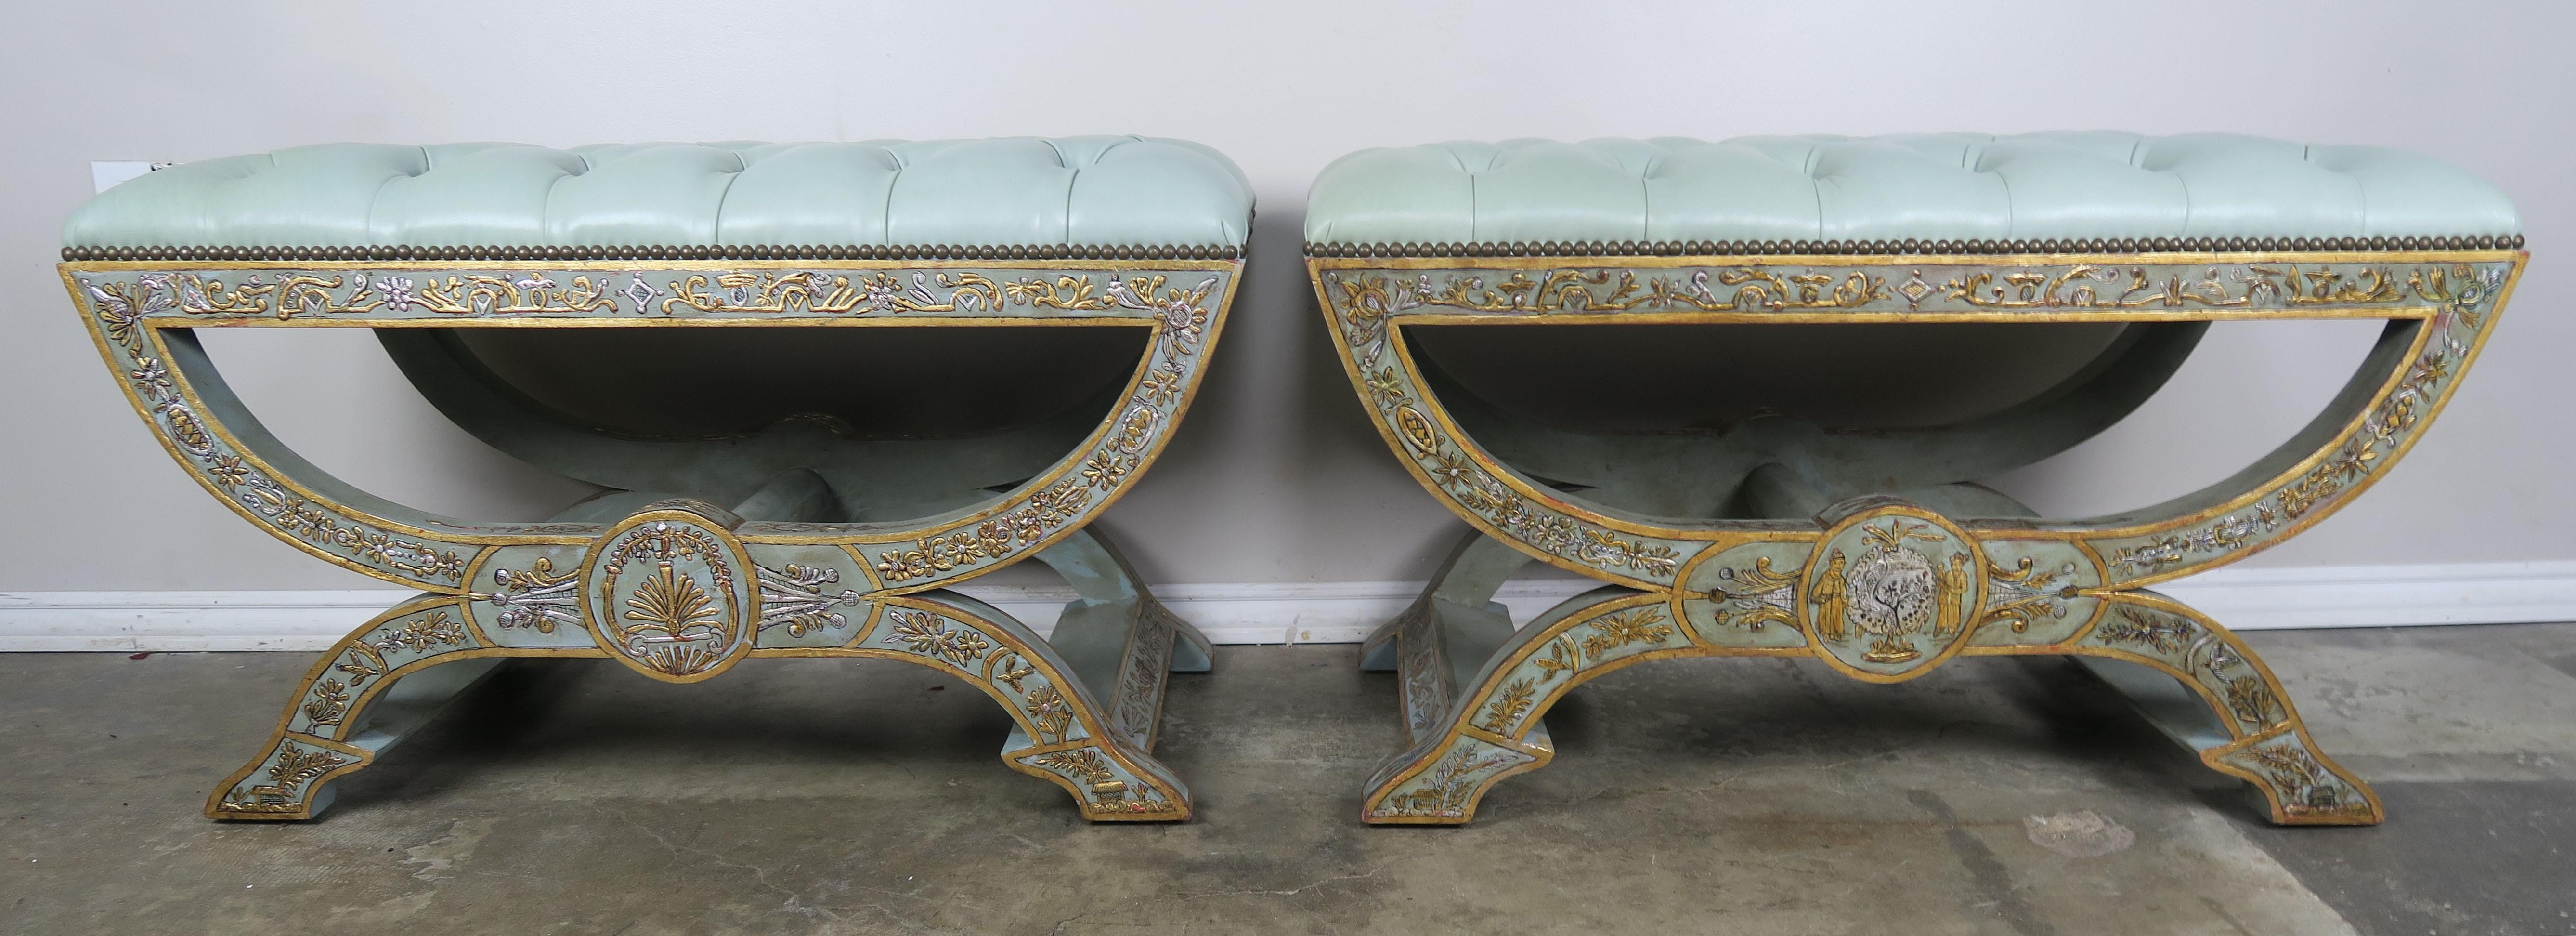 Italian Hand Chinoiserie Painted Benches with Soft Blue Leather Upholstery, Pair